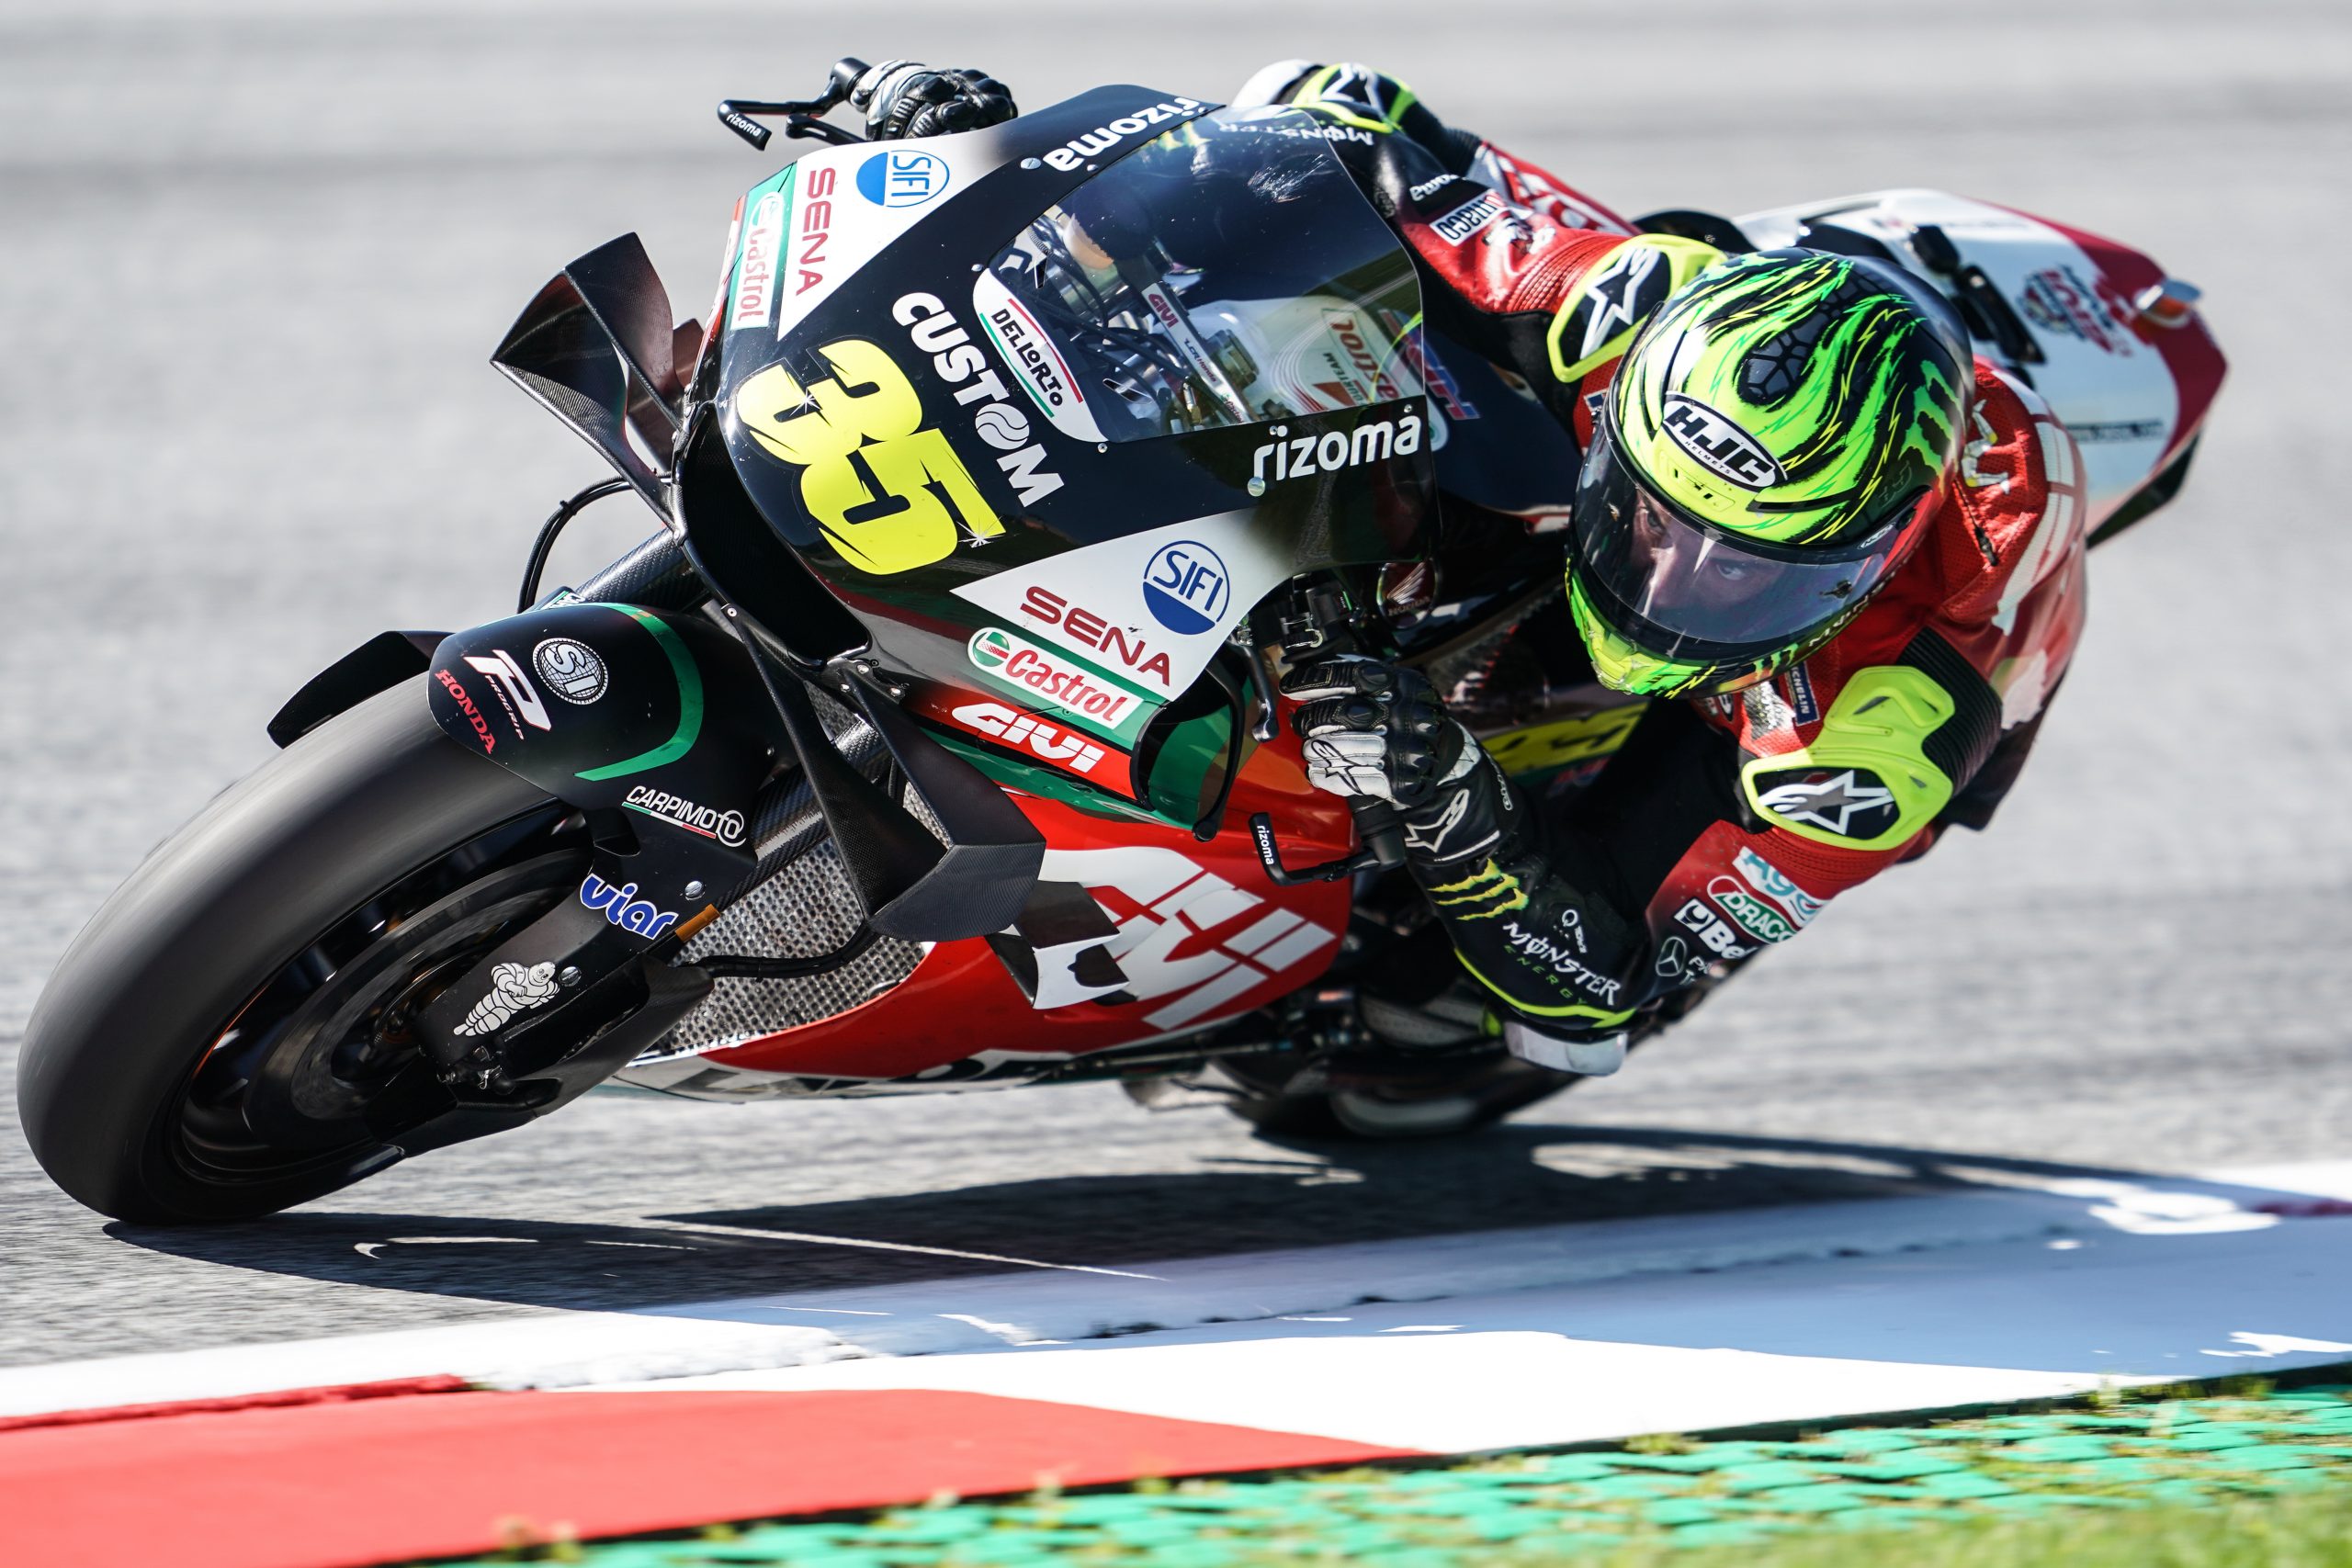 Crutchlow looking ahead after Spielberg disappointment